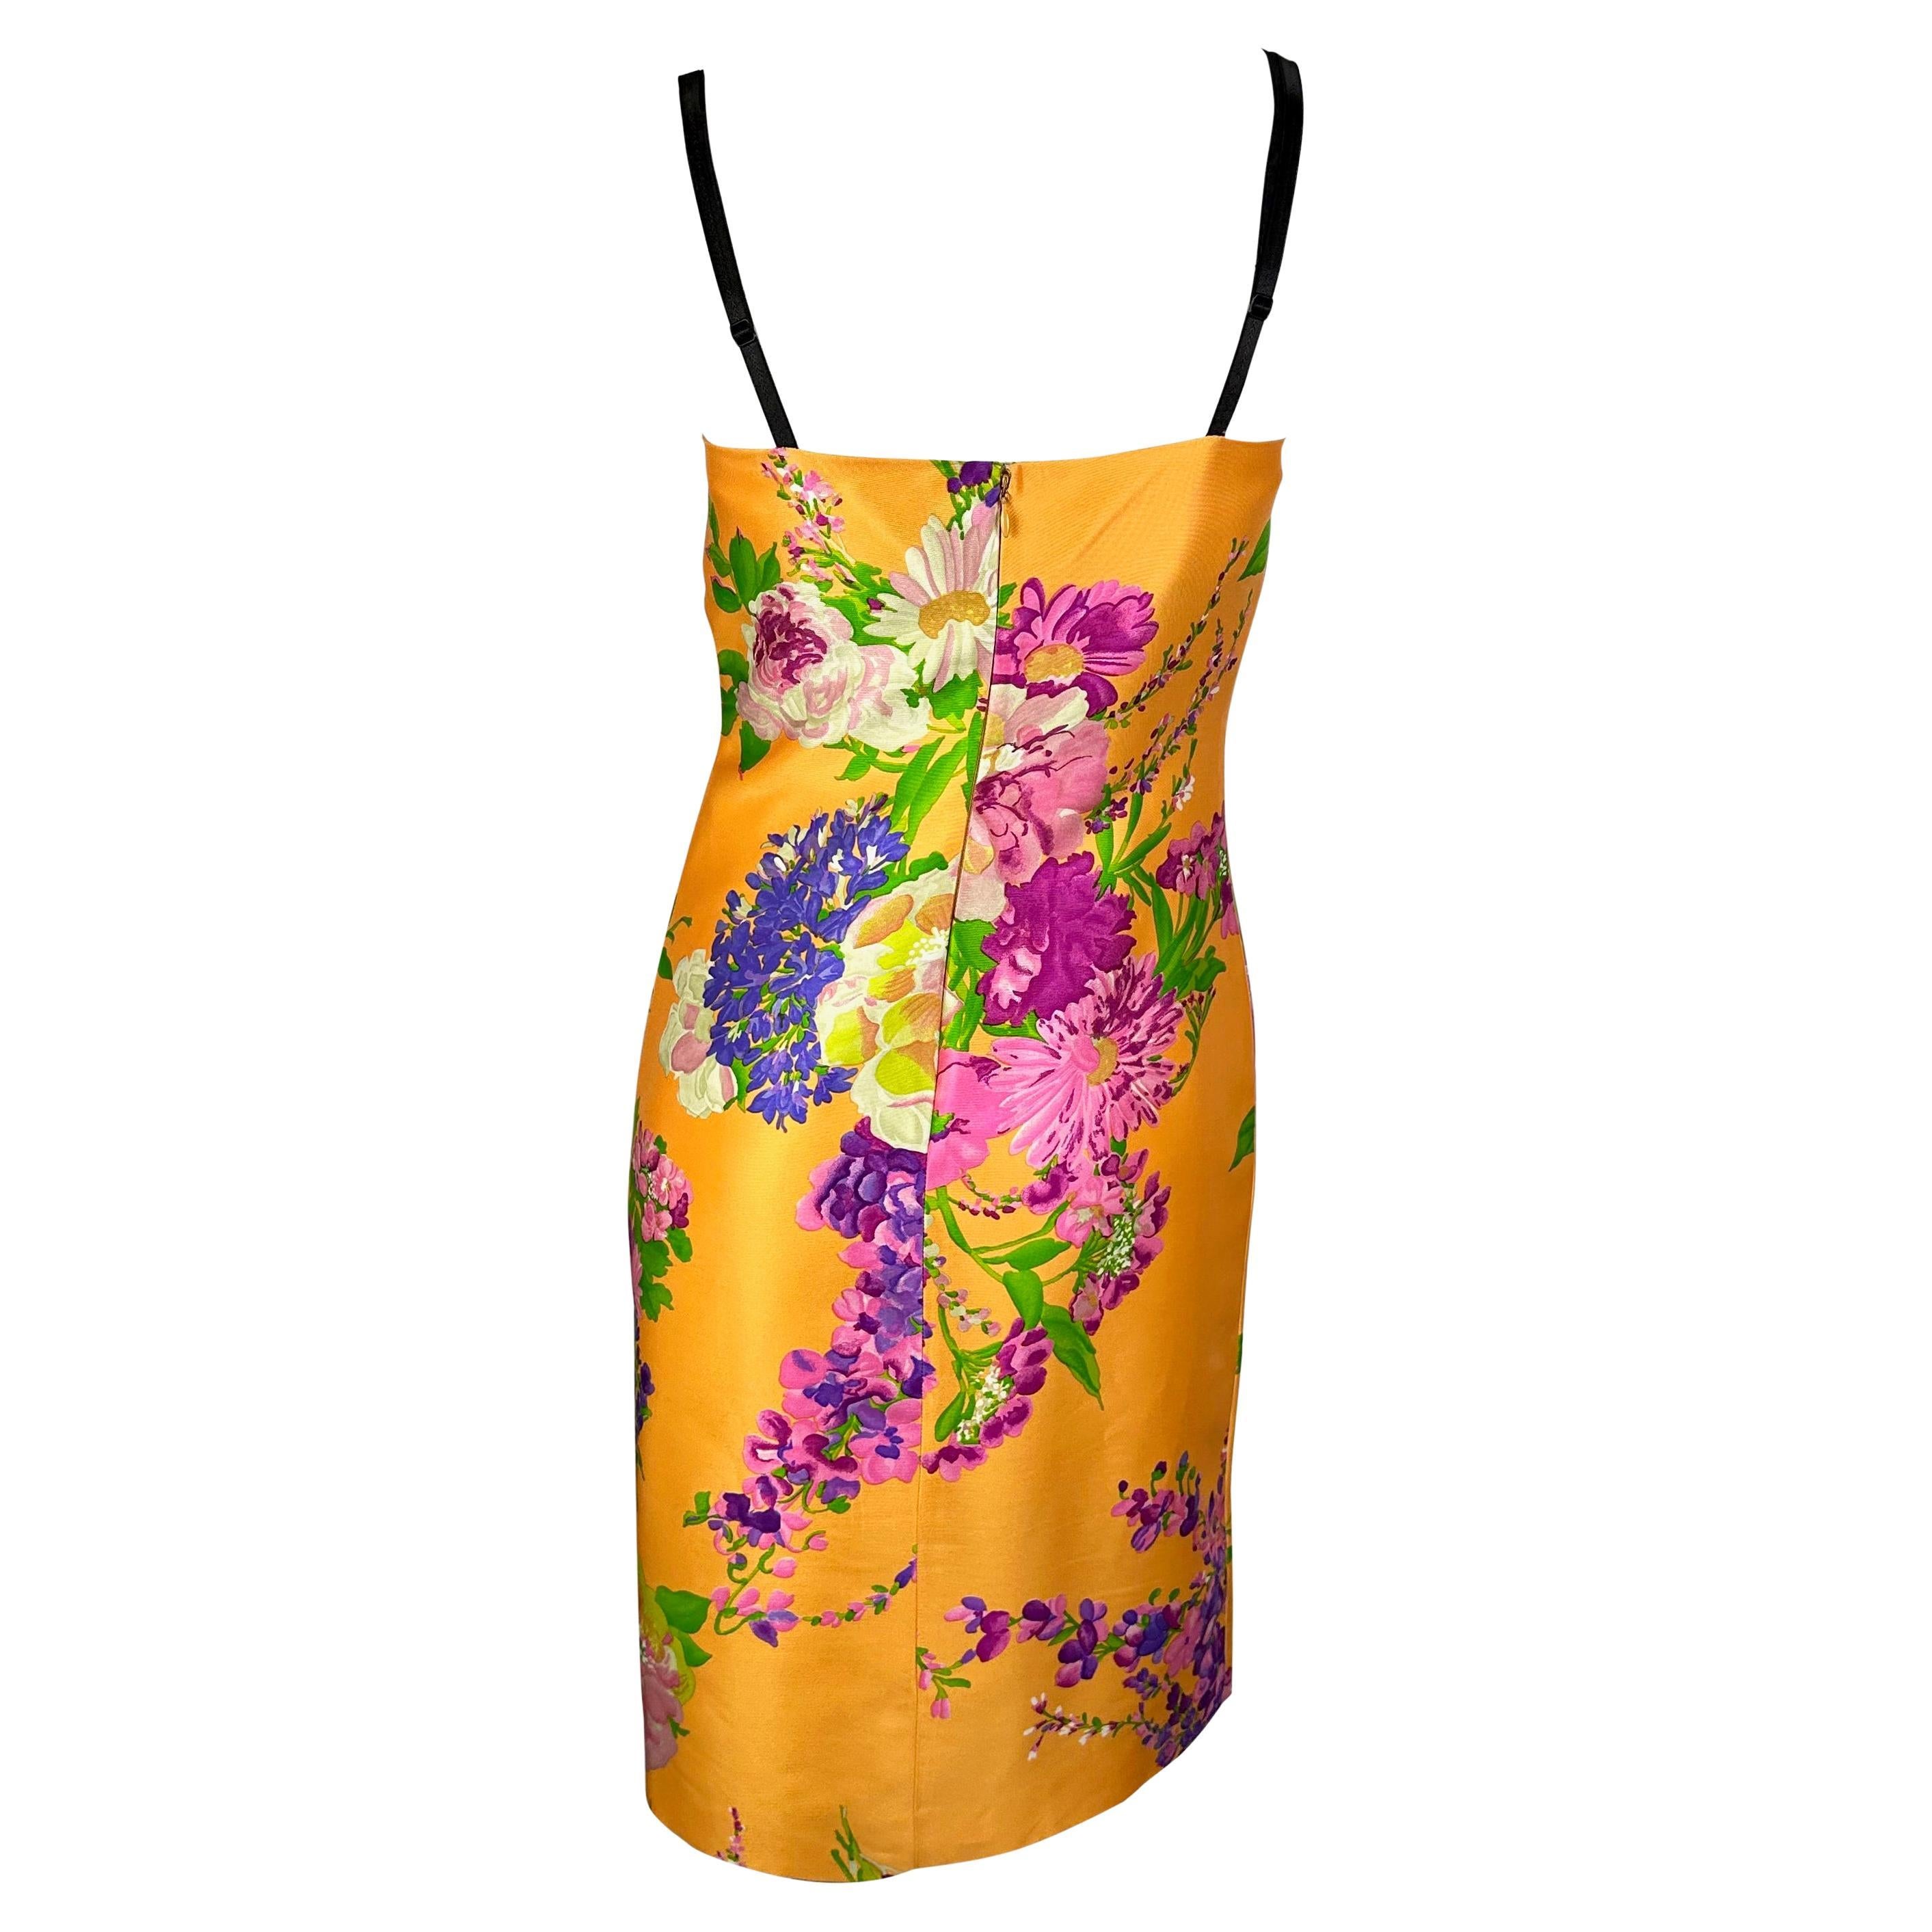 dolce and gabbana floral bustier dress